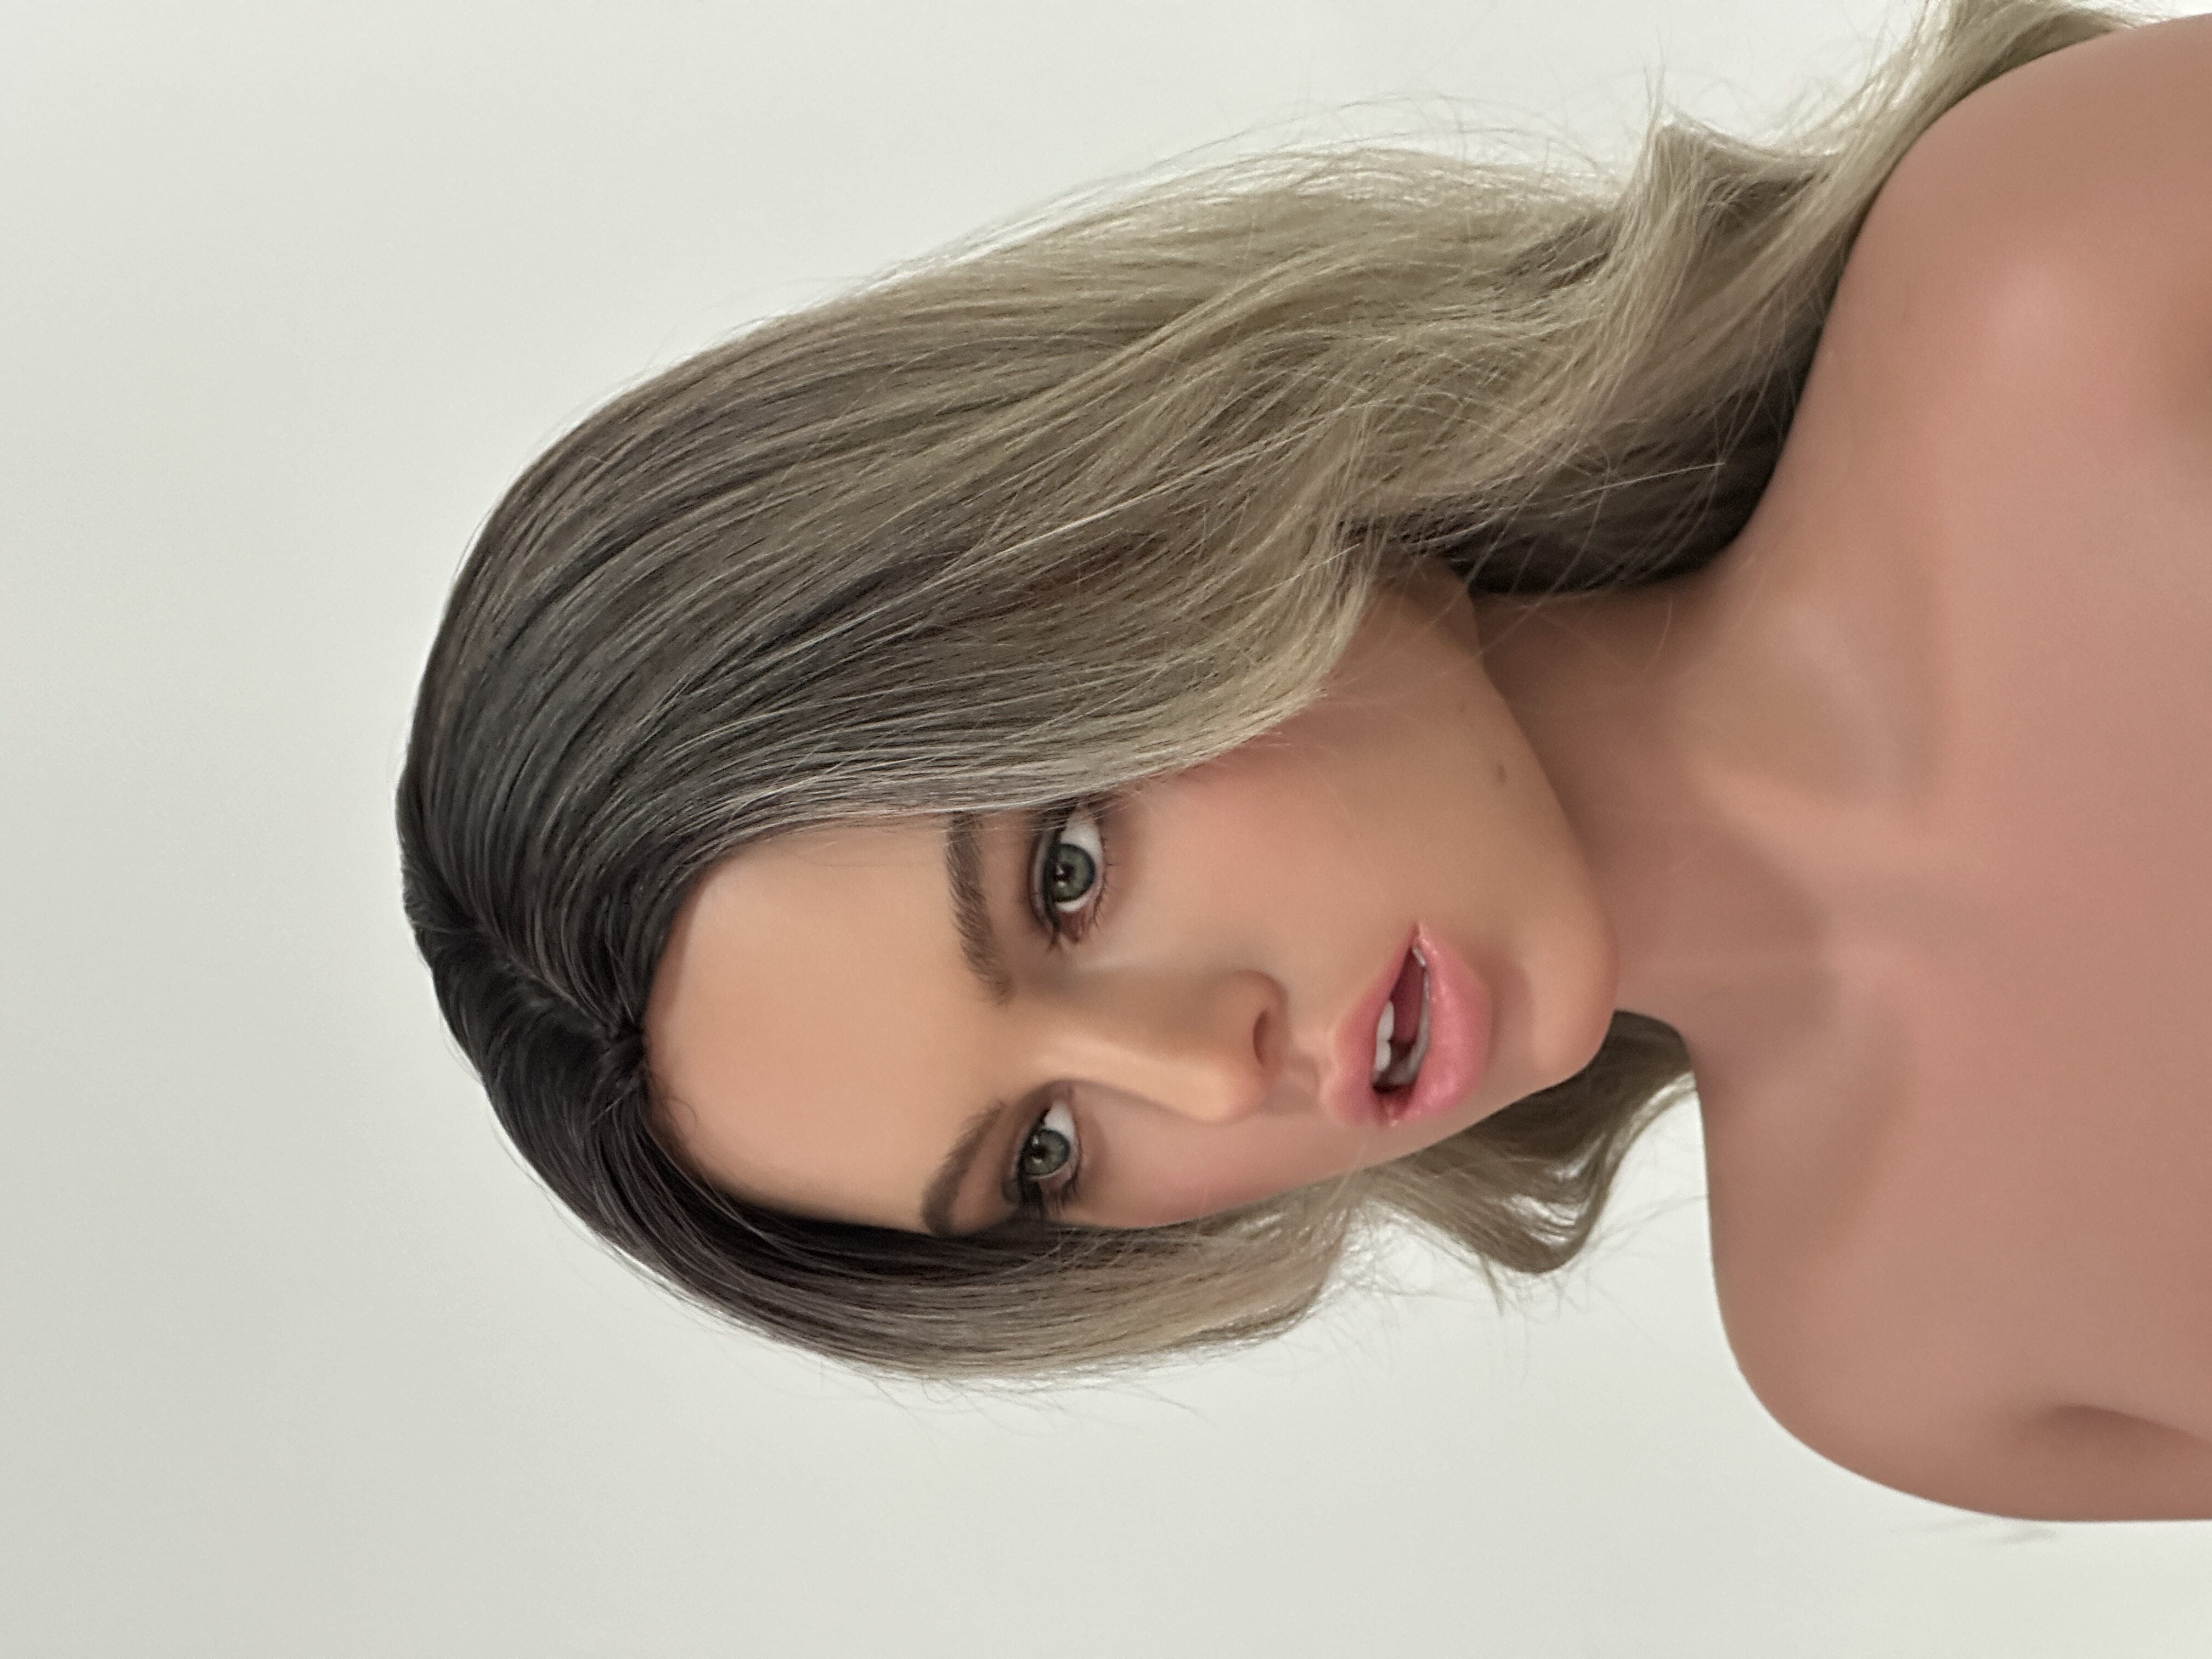 Mahogany - 163cm E-Cup Full Silicone Head Zelex SLE Doll (US In Stock) image21